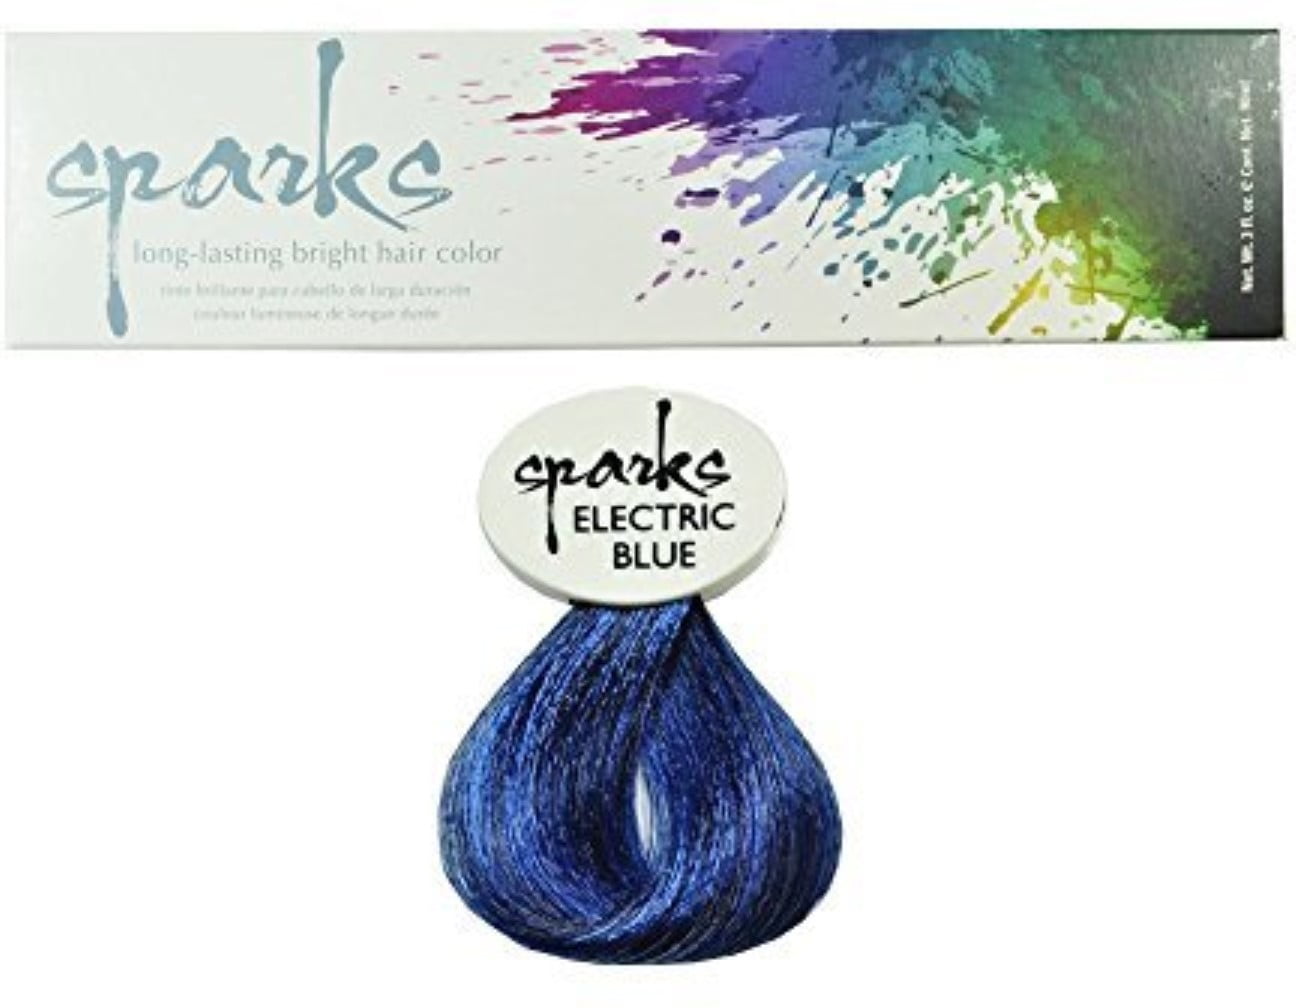 9. Sparks Long-Lasting Bright Hair Color - Electric Blue - wide 3